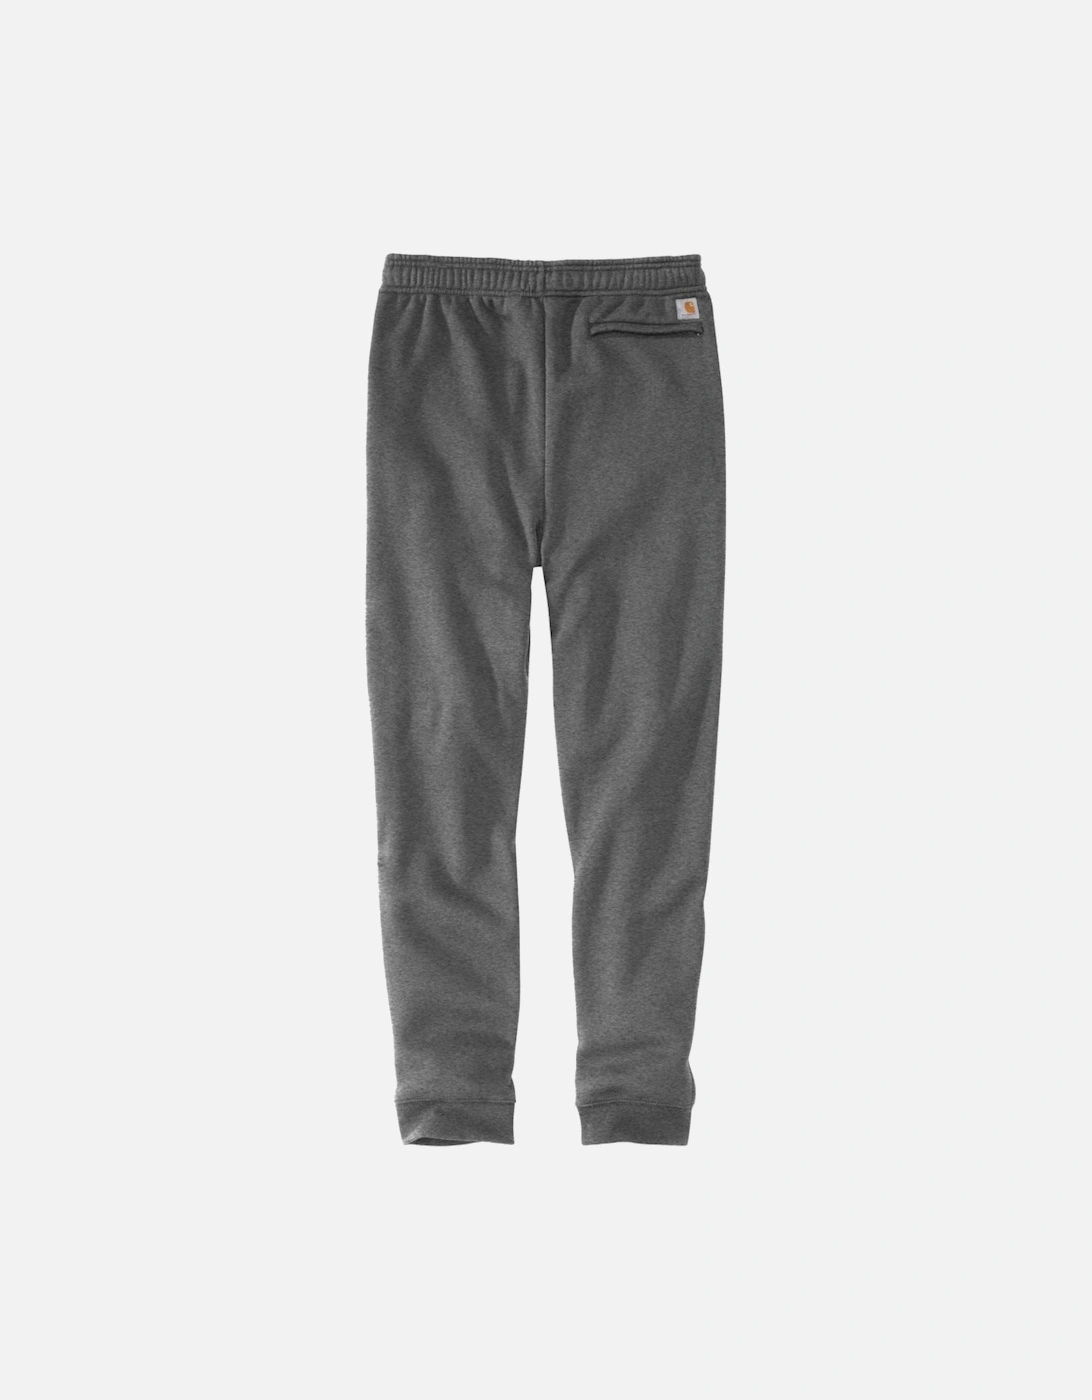 Carhartt Mens Midweight Tapered Graphic Sweatpant Joggers